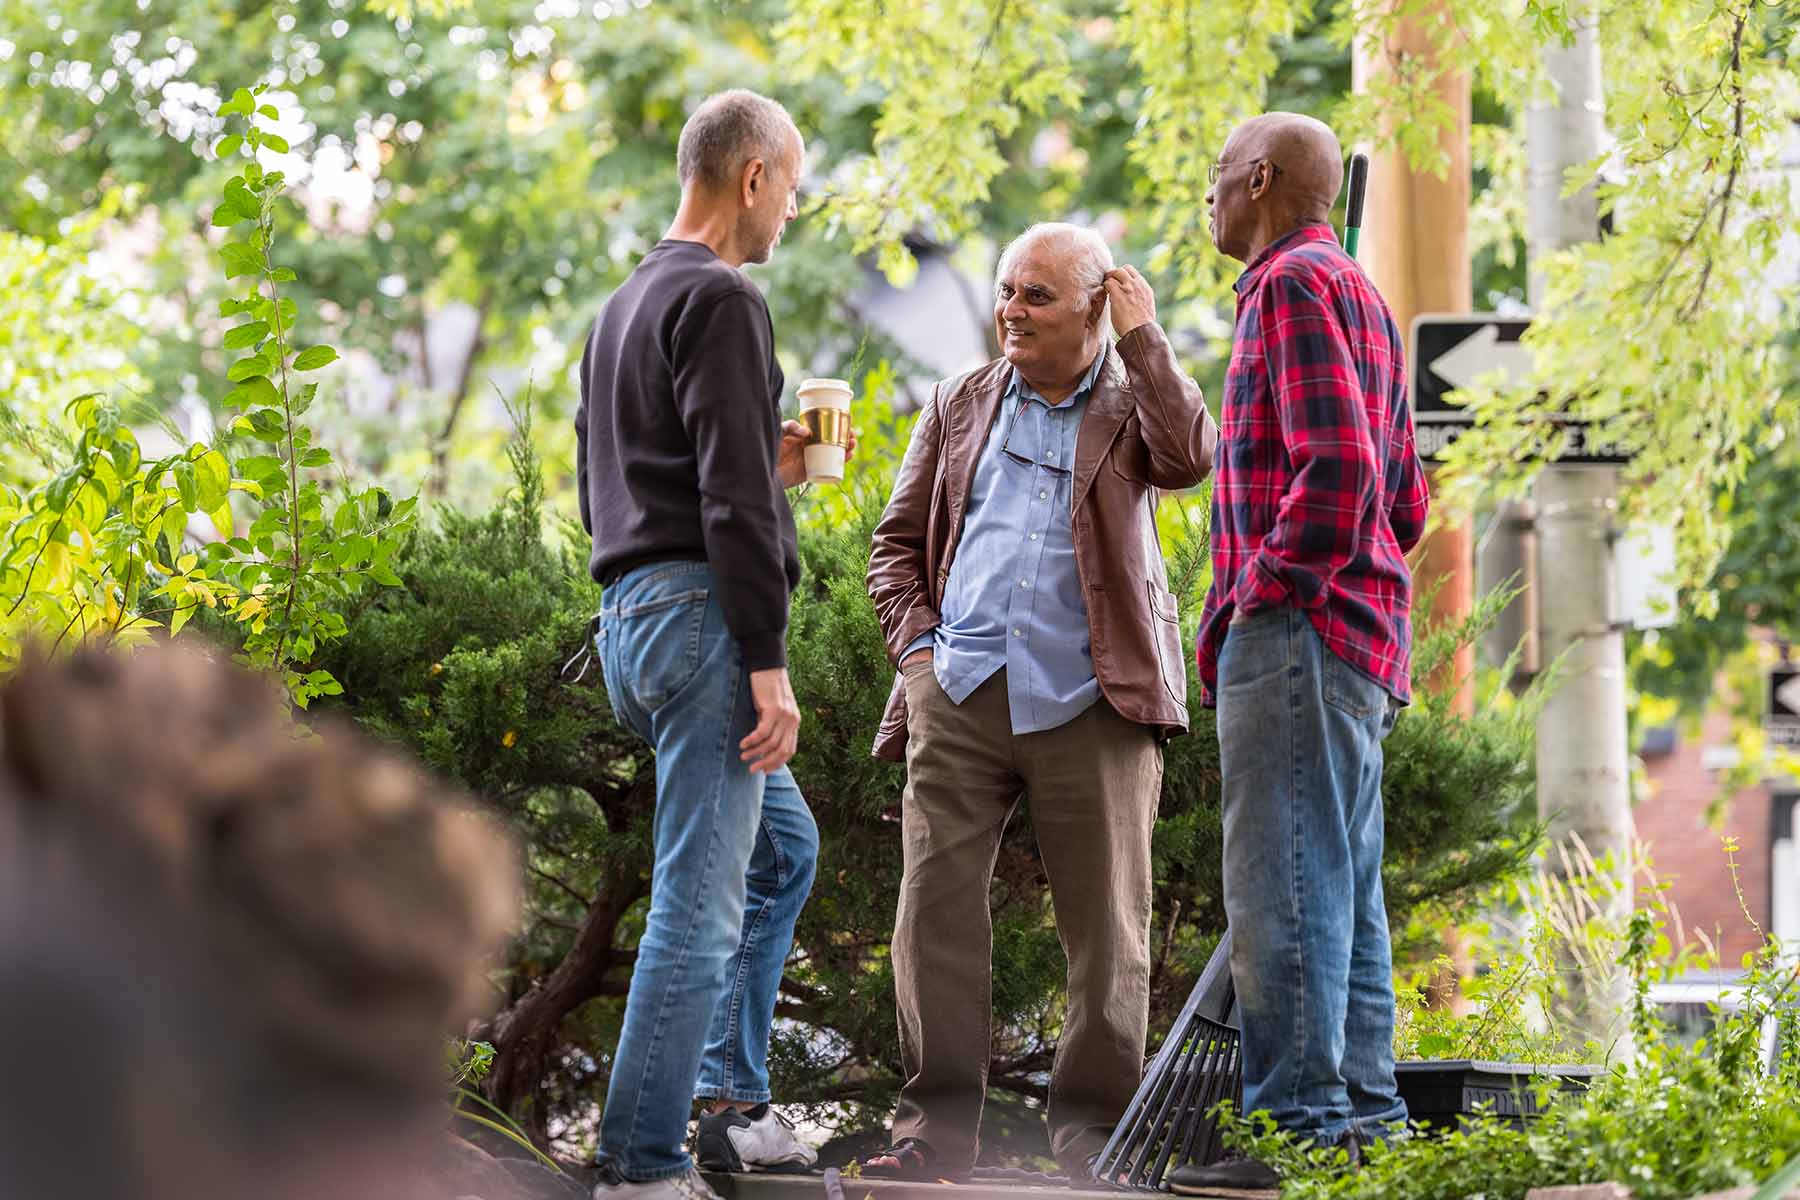 Three men, one holding a coffee, another leaning on a rake, chat together outside amid a street's trees and bushes.